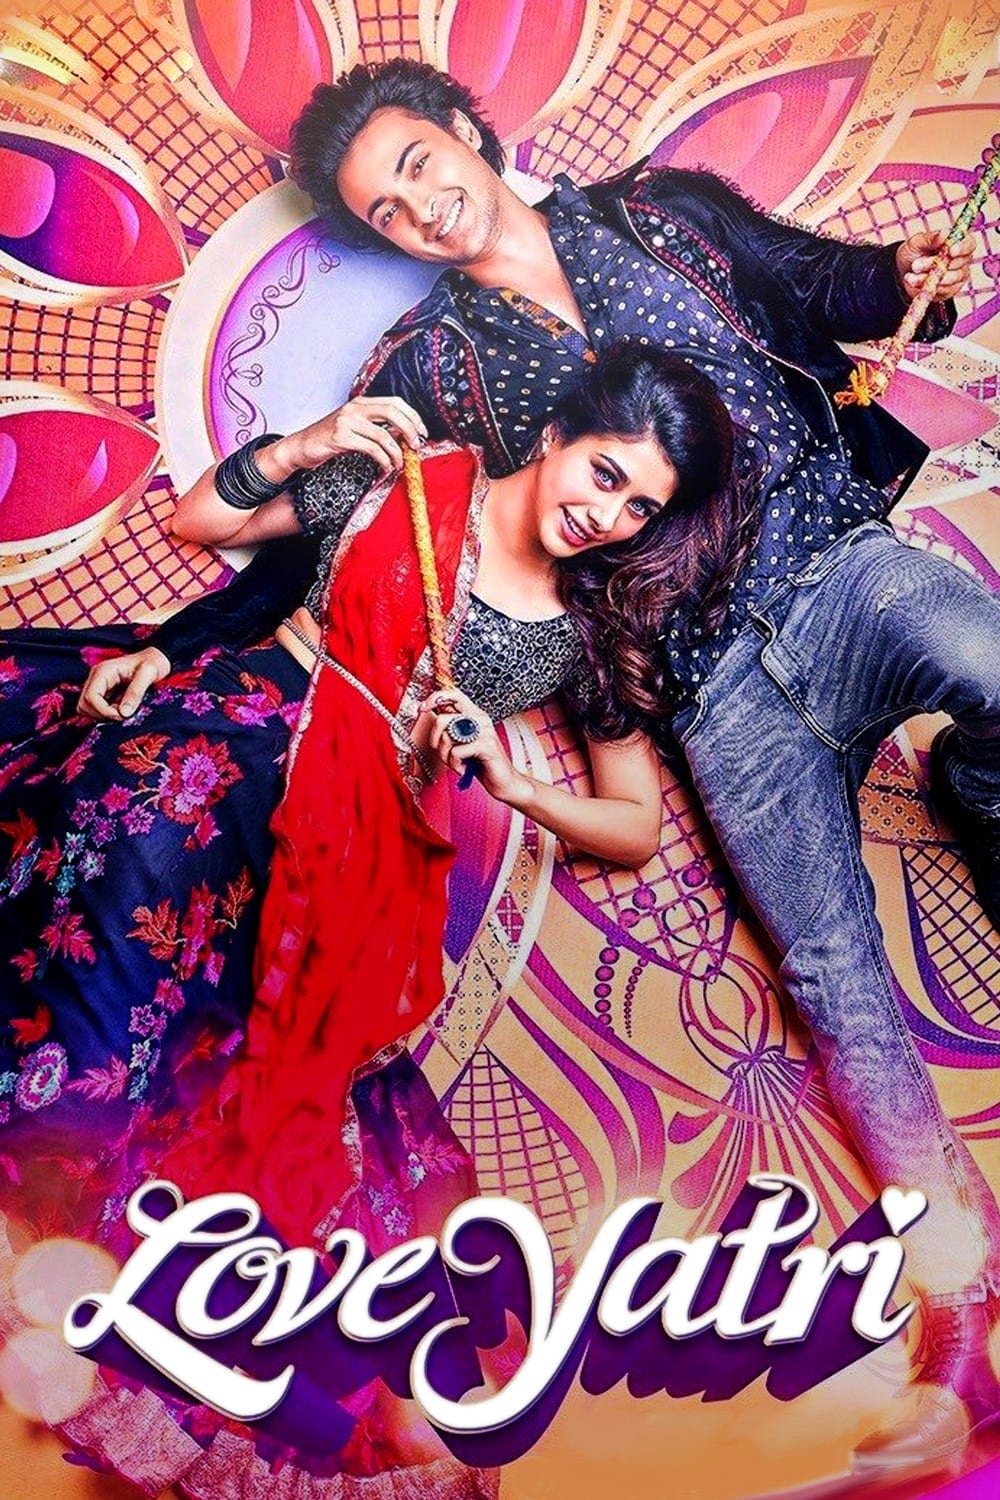 Poster for the movie "Loveyatri"